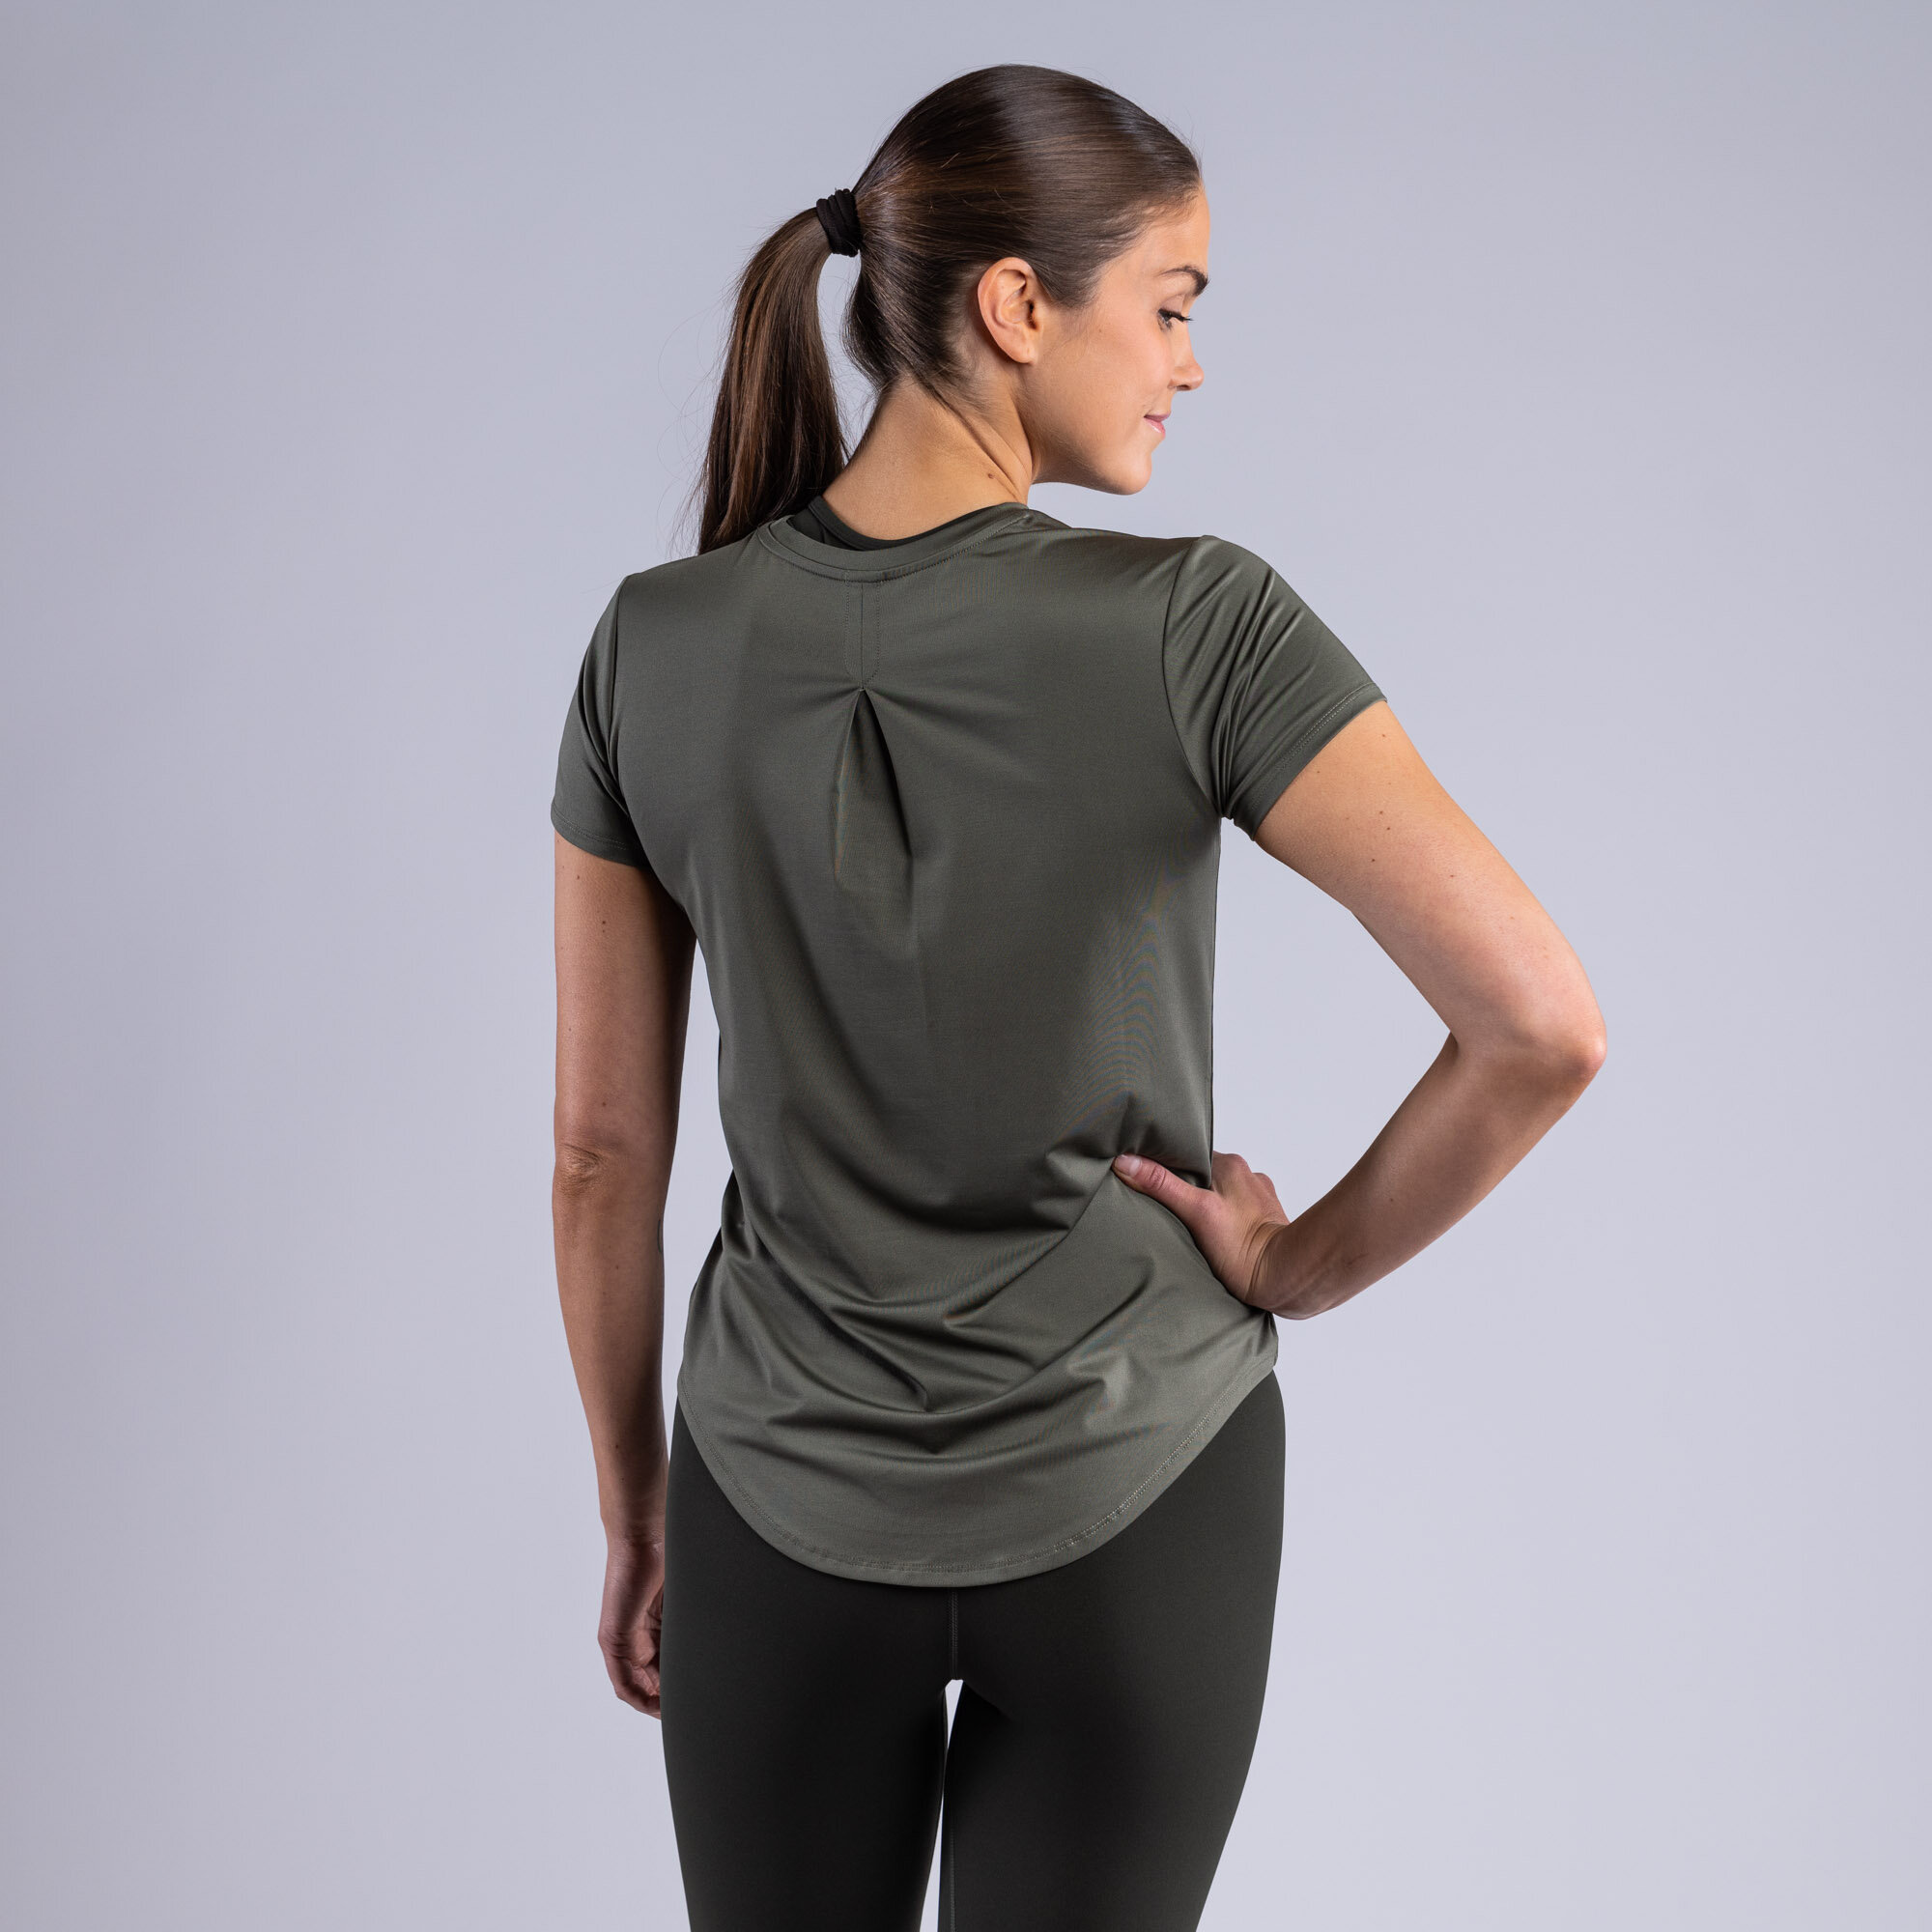 CLN Lucy ws t-shirt Dusty olive